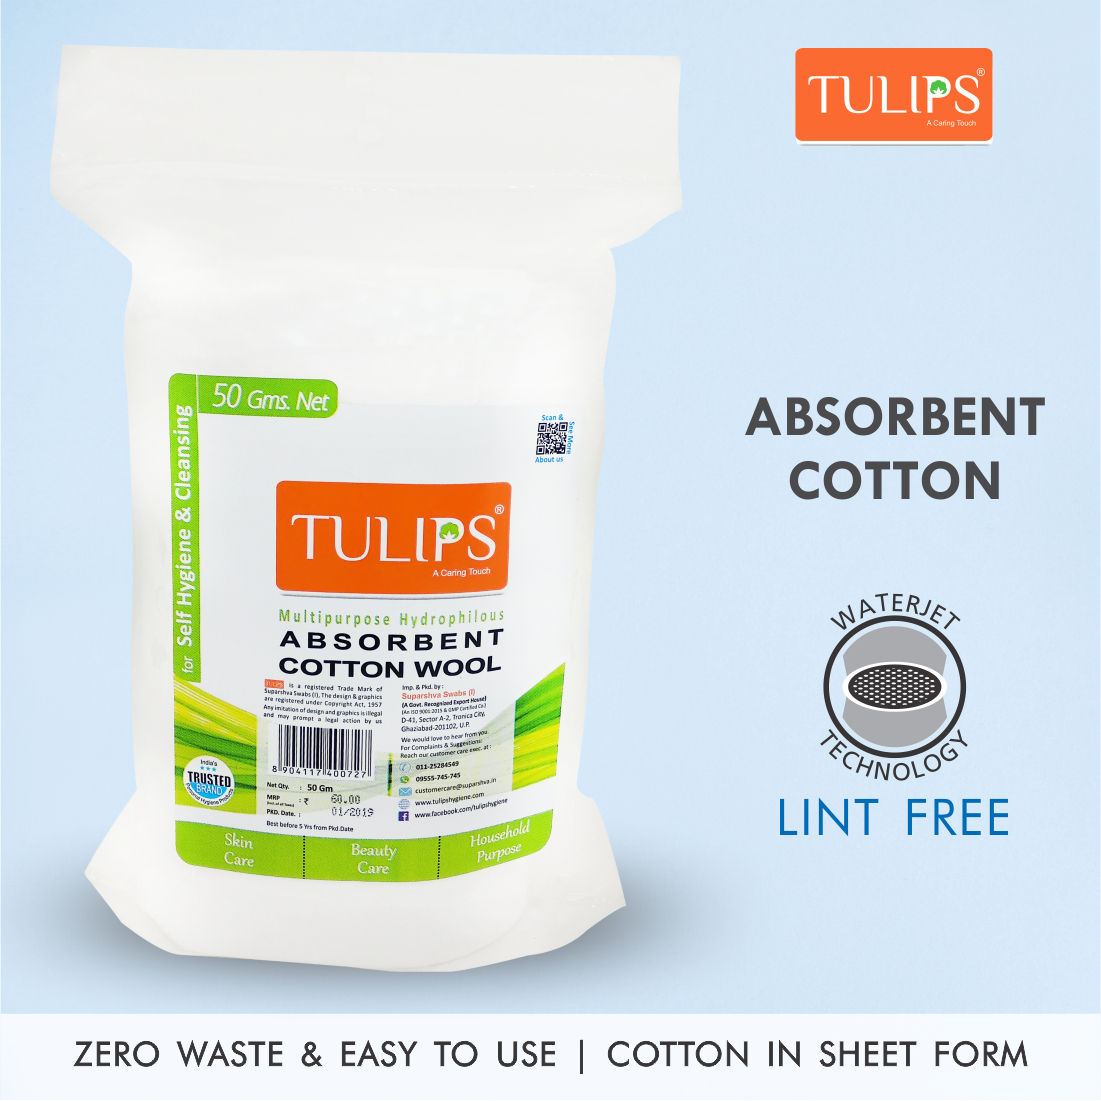 Tulips Absorbent Soft Cotton Wool/Roll - For Makeup Remover, Beauty, Adult  & Baby Care Disposable Cotton, 100 g